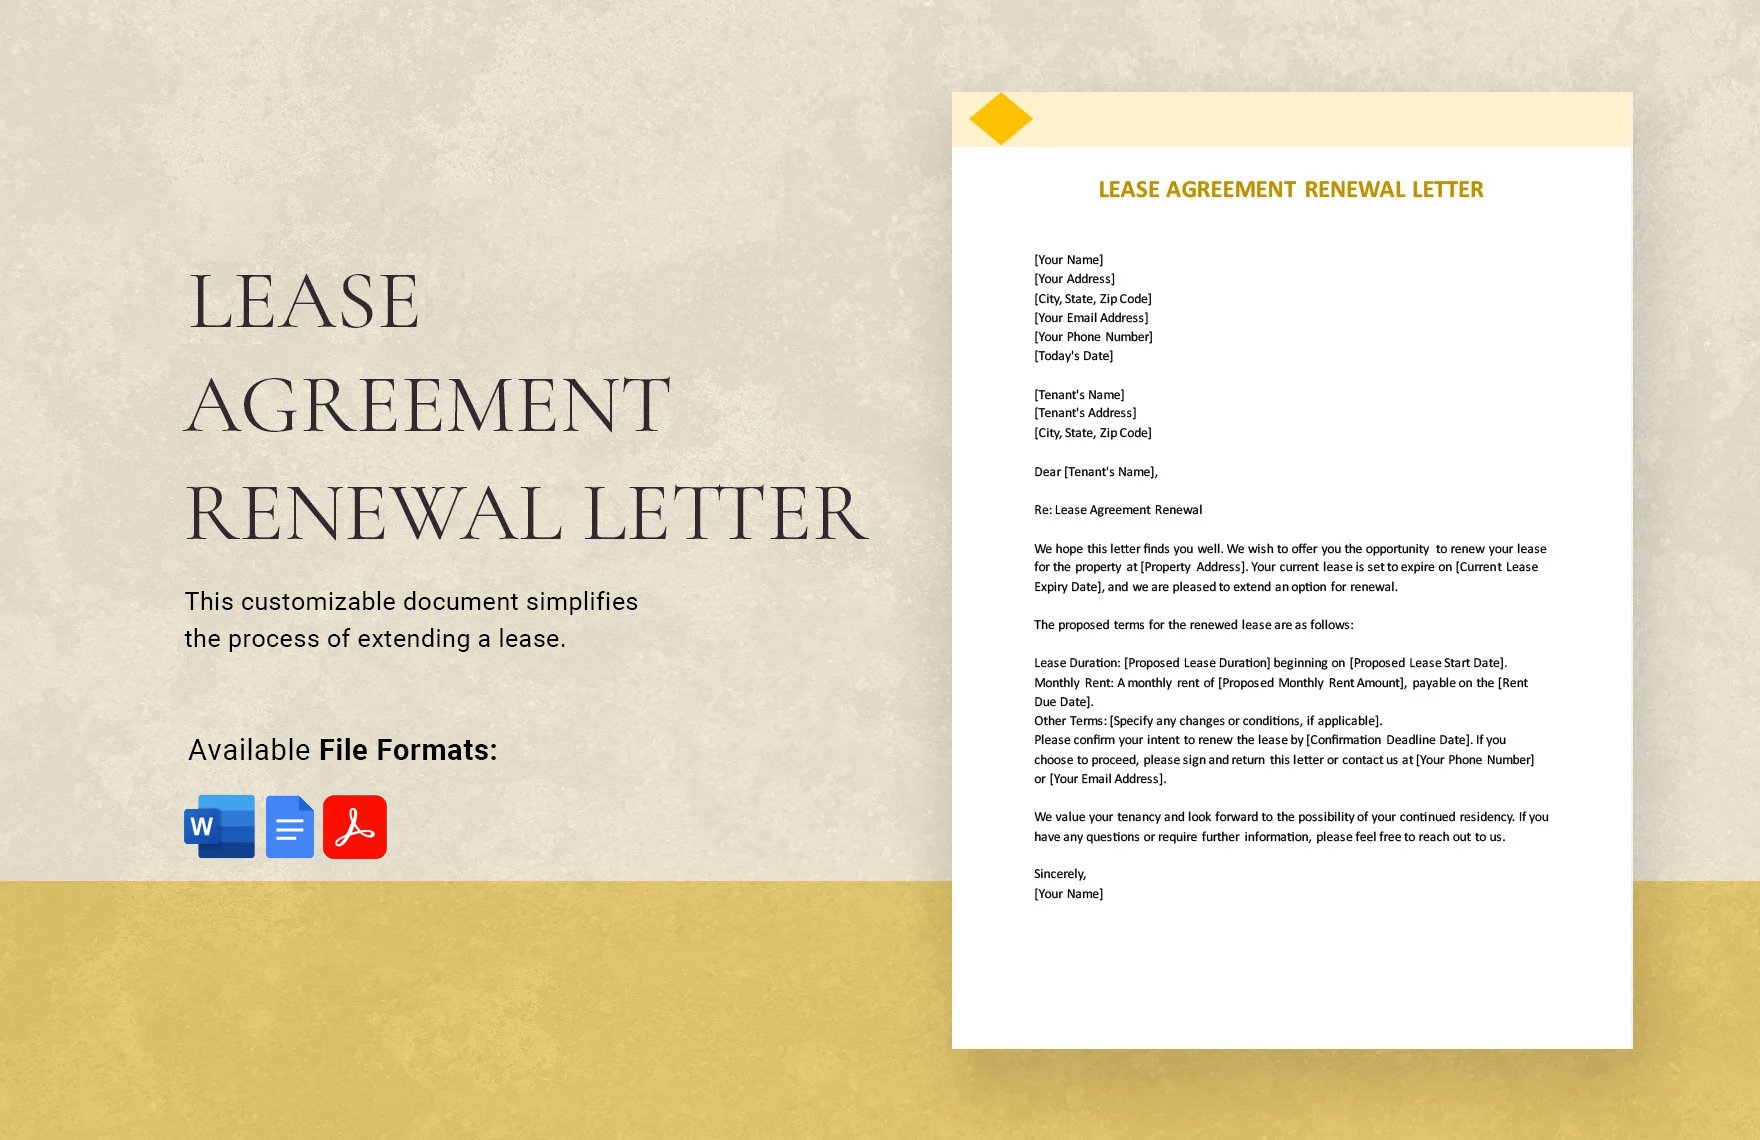 Lease Agreement Renewal Letter in Word, Google Docs, PDF